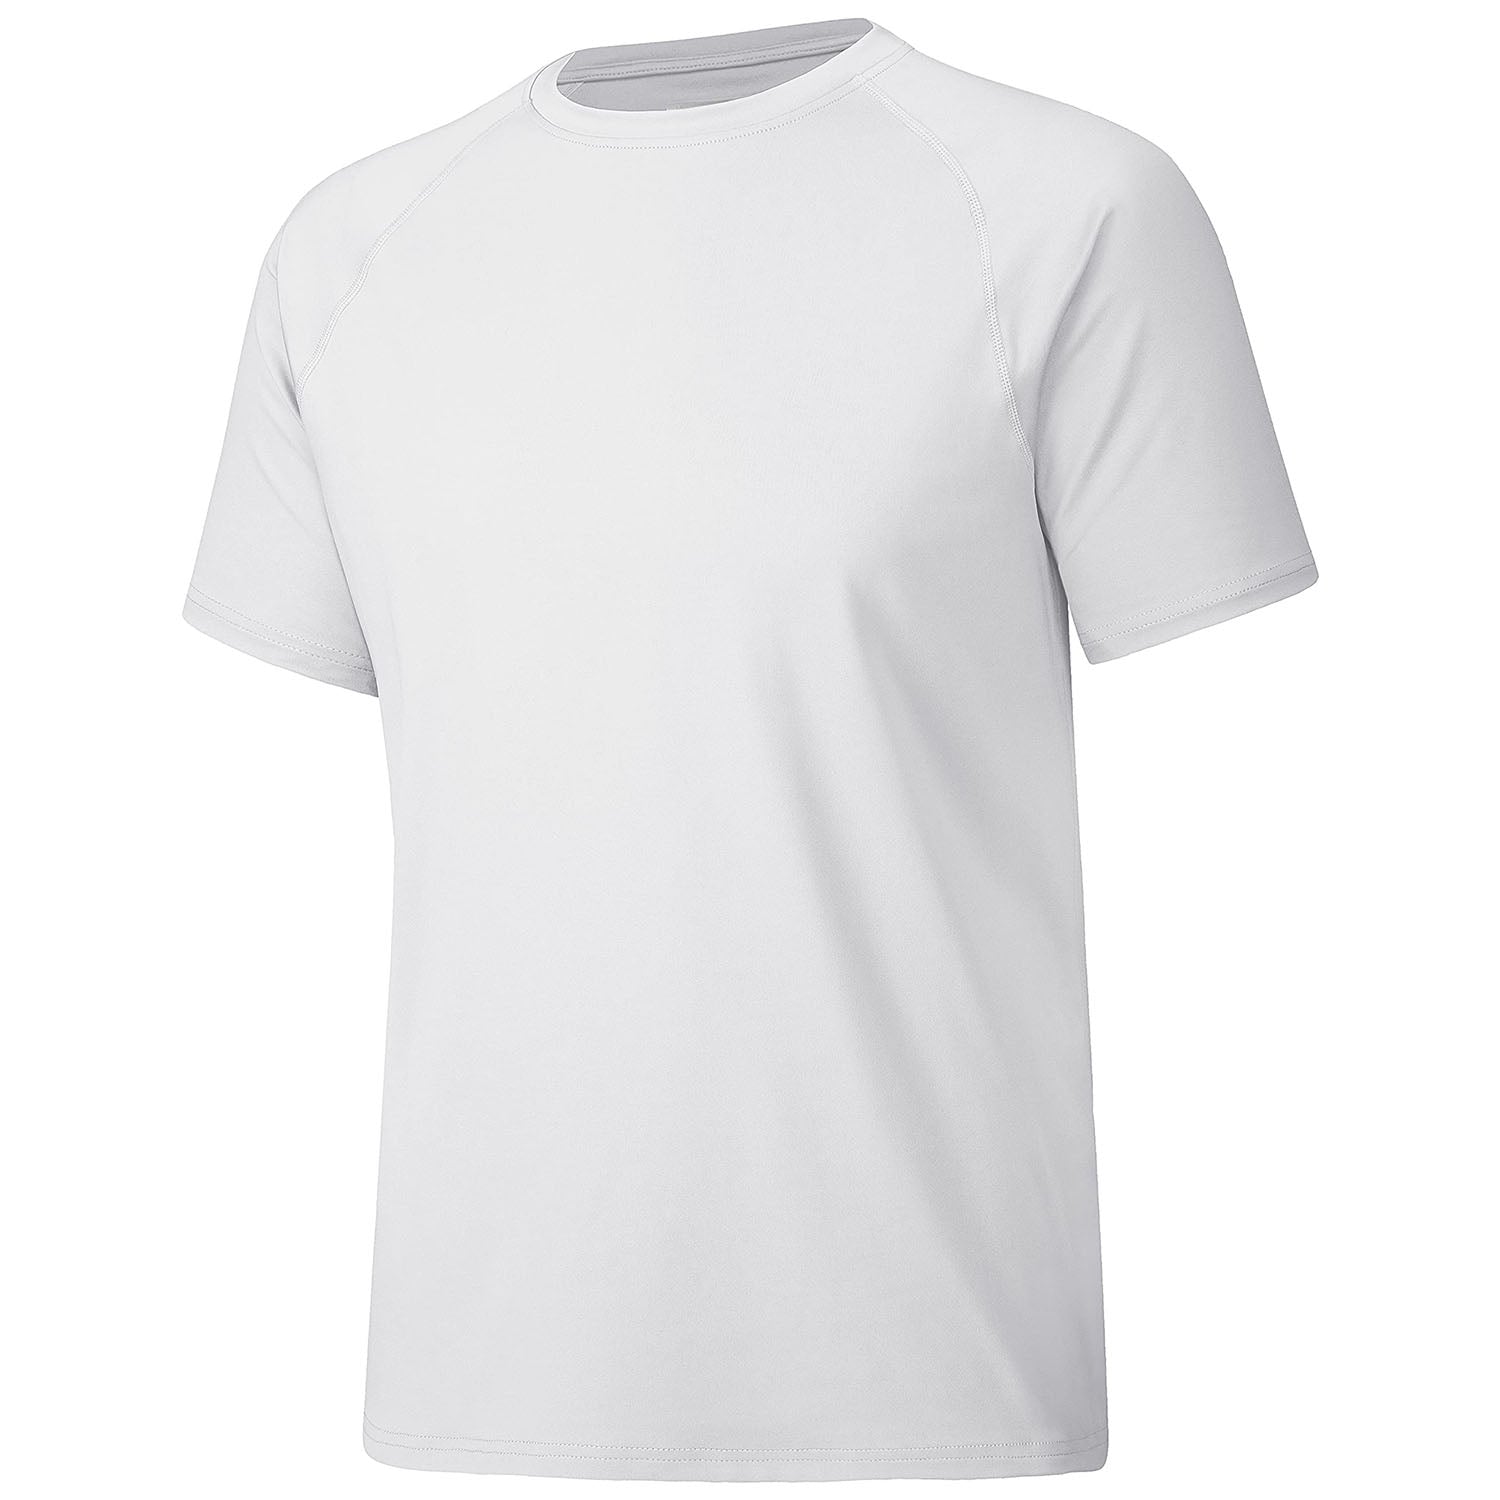 Buy 4 Get 4th Free】Men's T-shirt Quick Dry UPF 80+ AthleticT-Shirts –  MAGCOMSEN